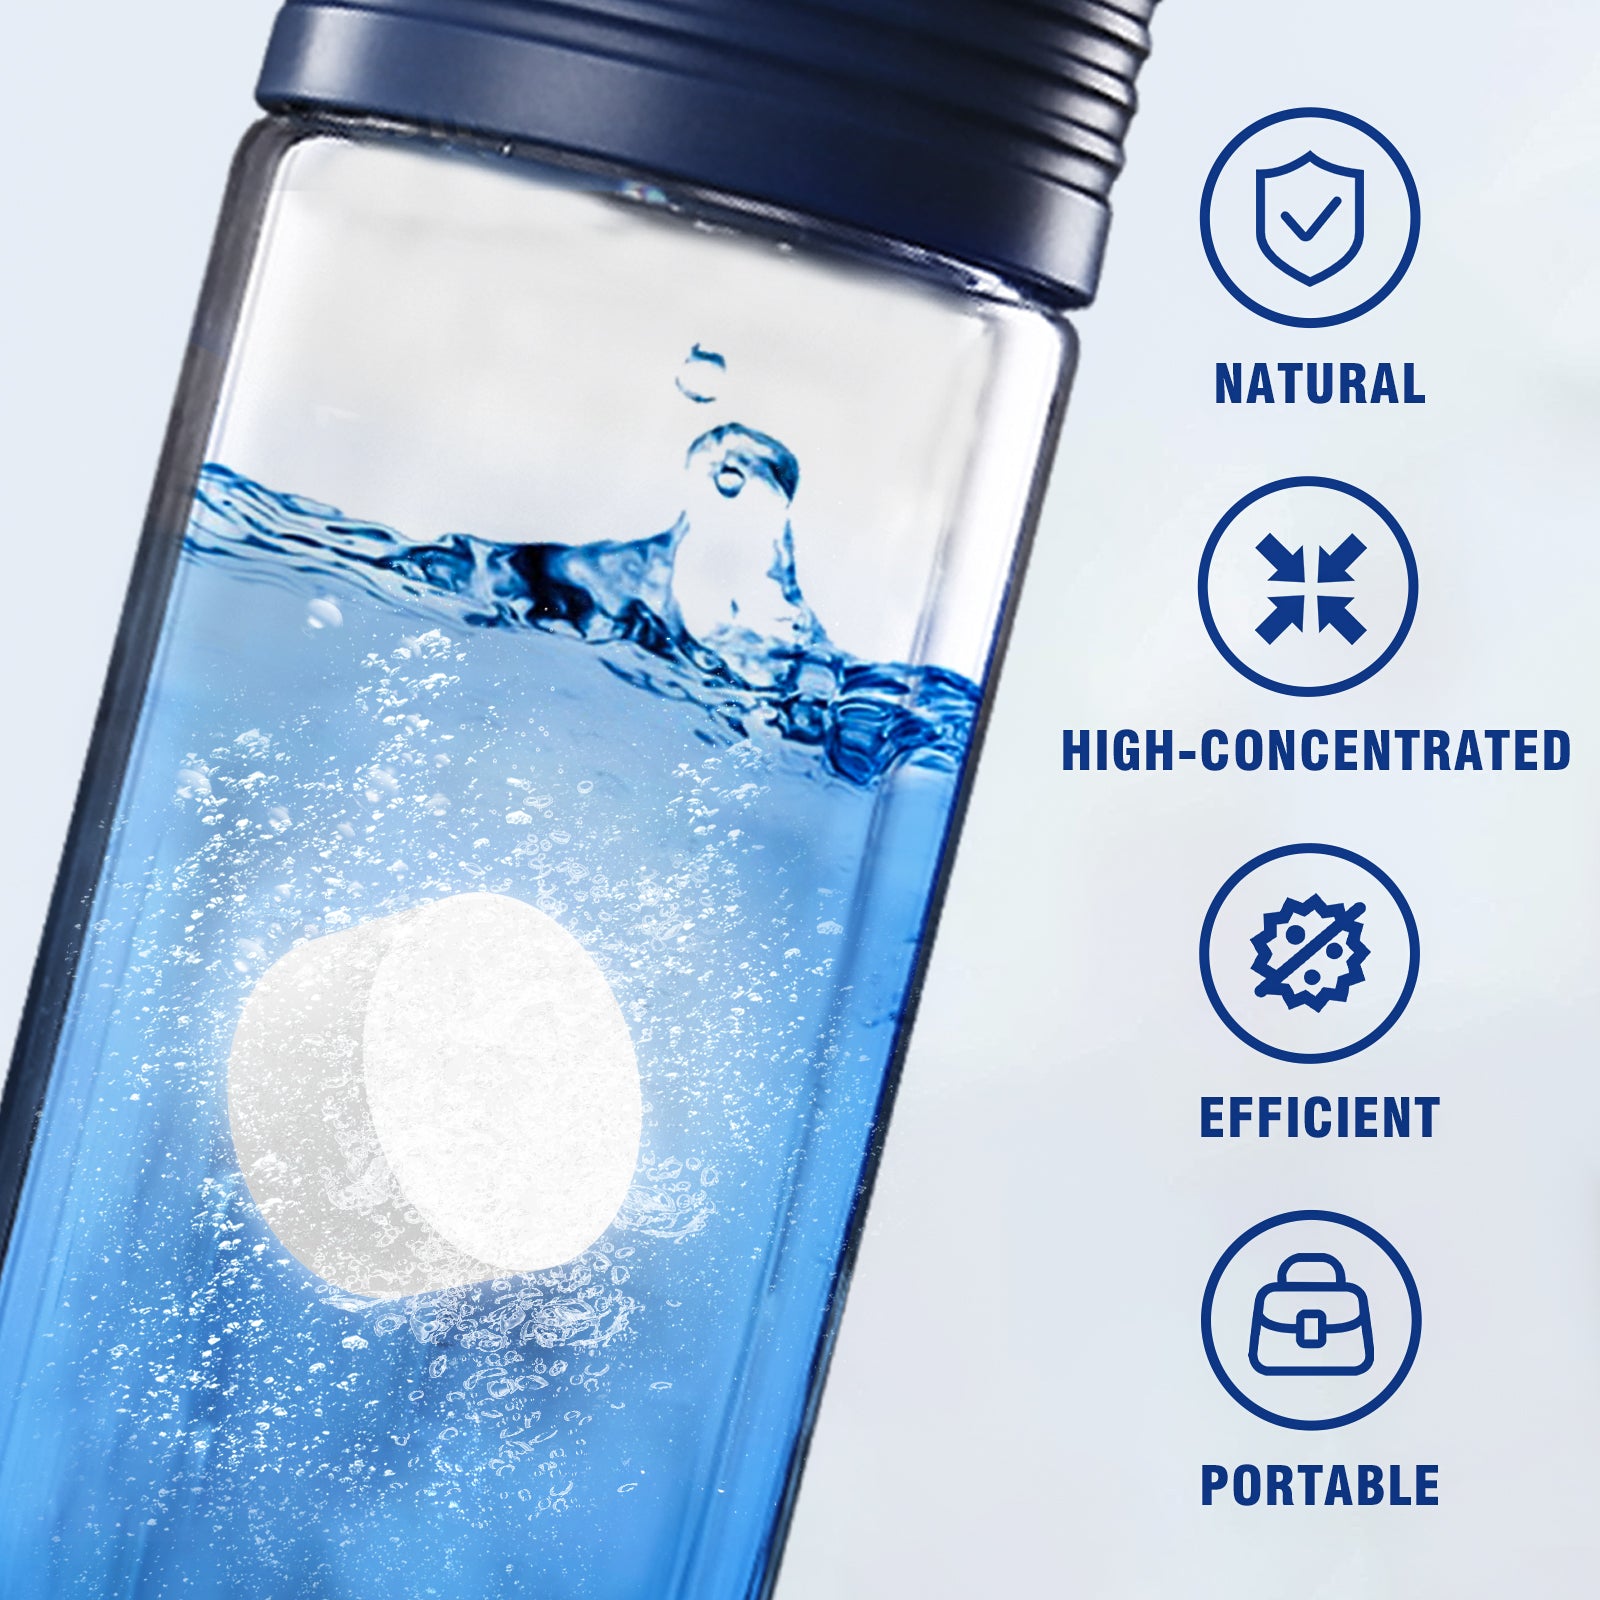 Water Bottle Cleaning Tablets